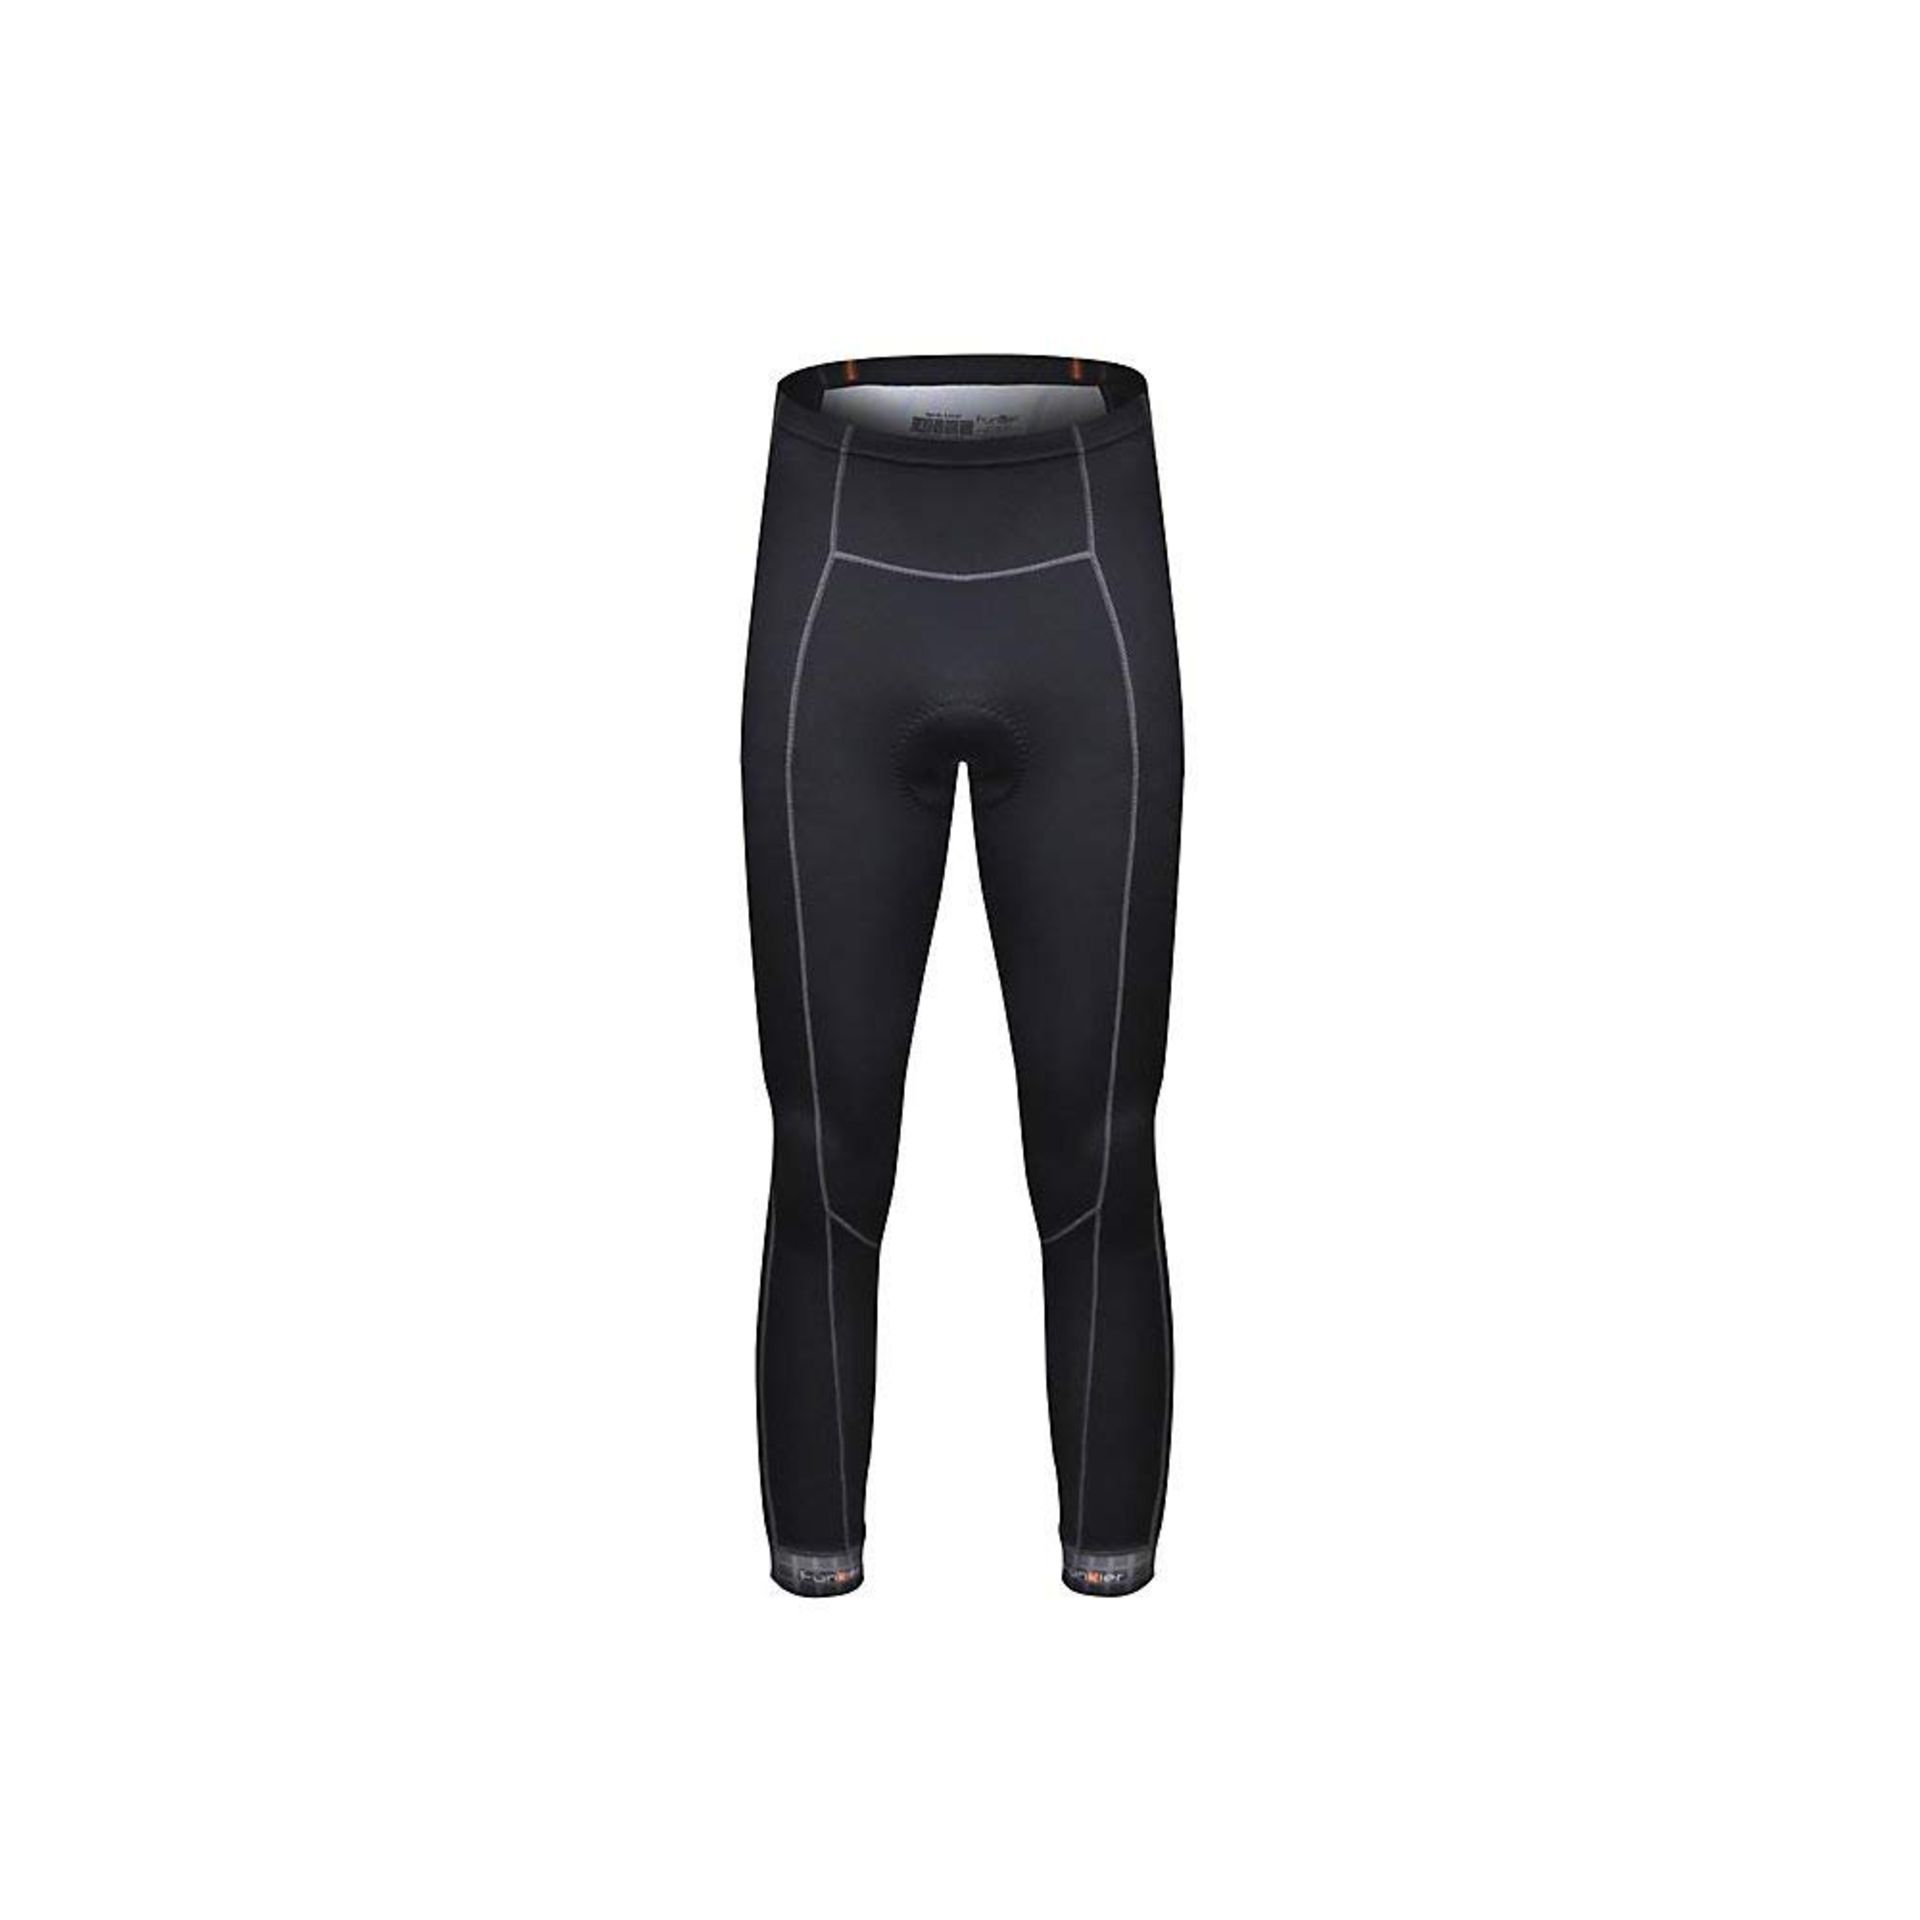 3 x Pairs of Women's Microfleece Thermal Tights | Total RRP £92.62 | See Description for Details